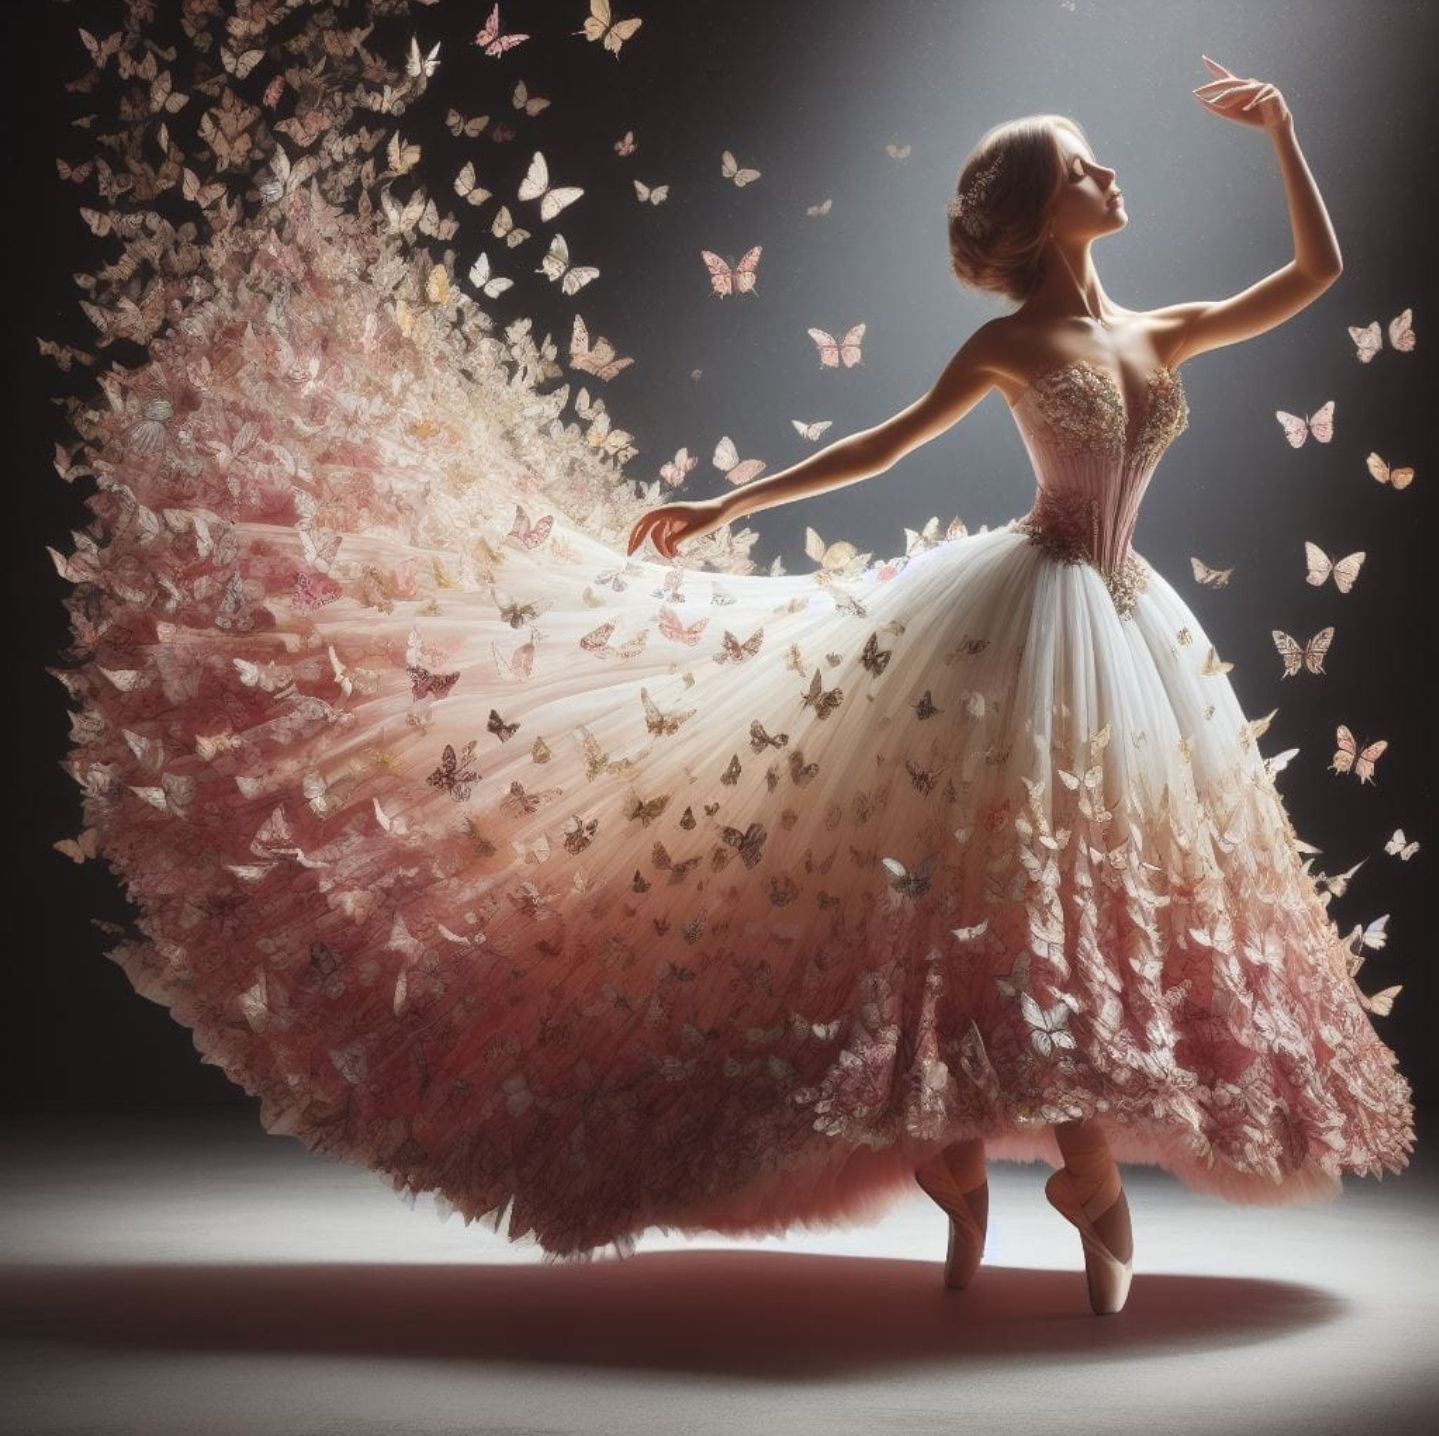 Ballerina in a butterfly costume